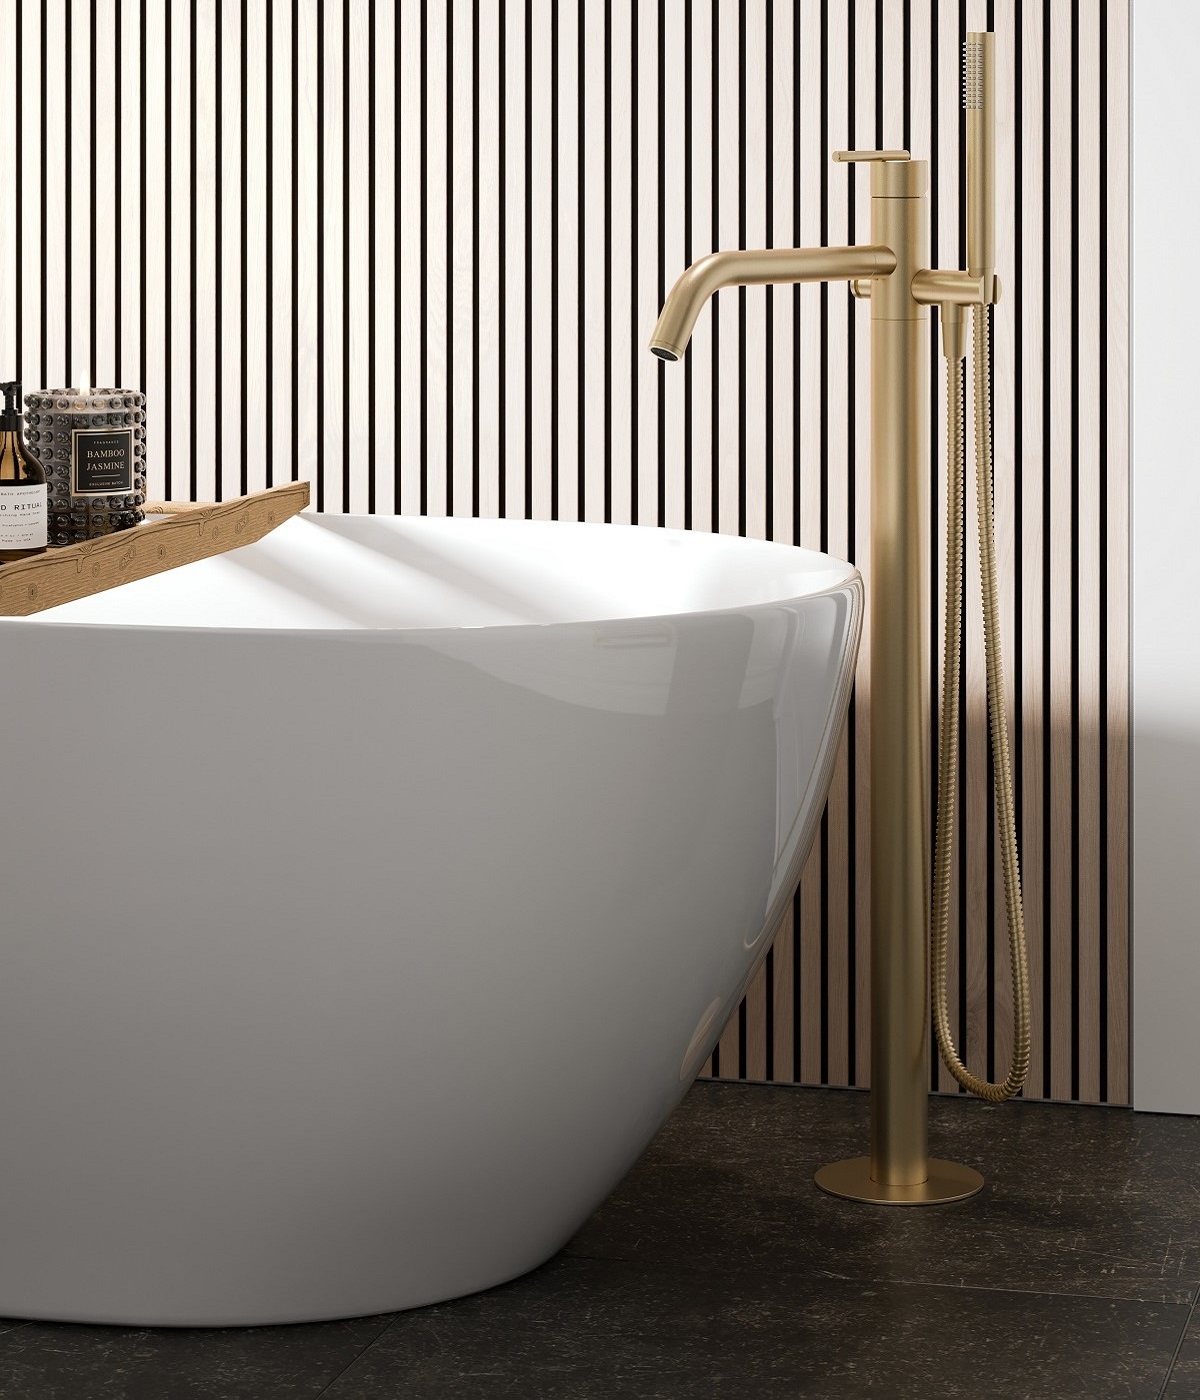 detail of corner of freestanding bath with brass pillar tap and wood panelled wall